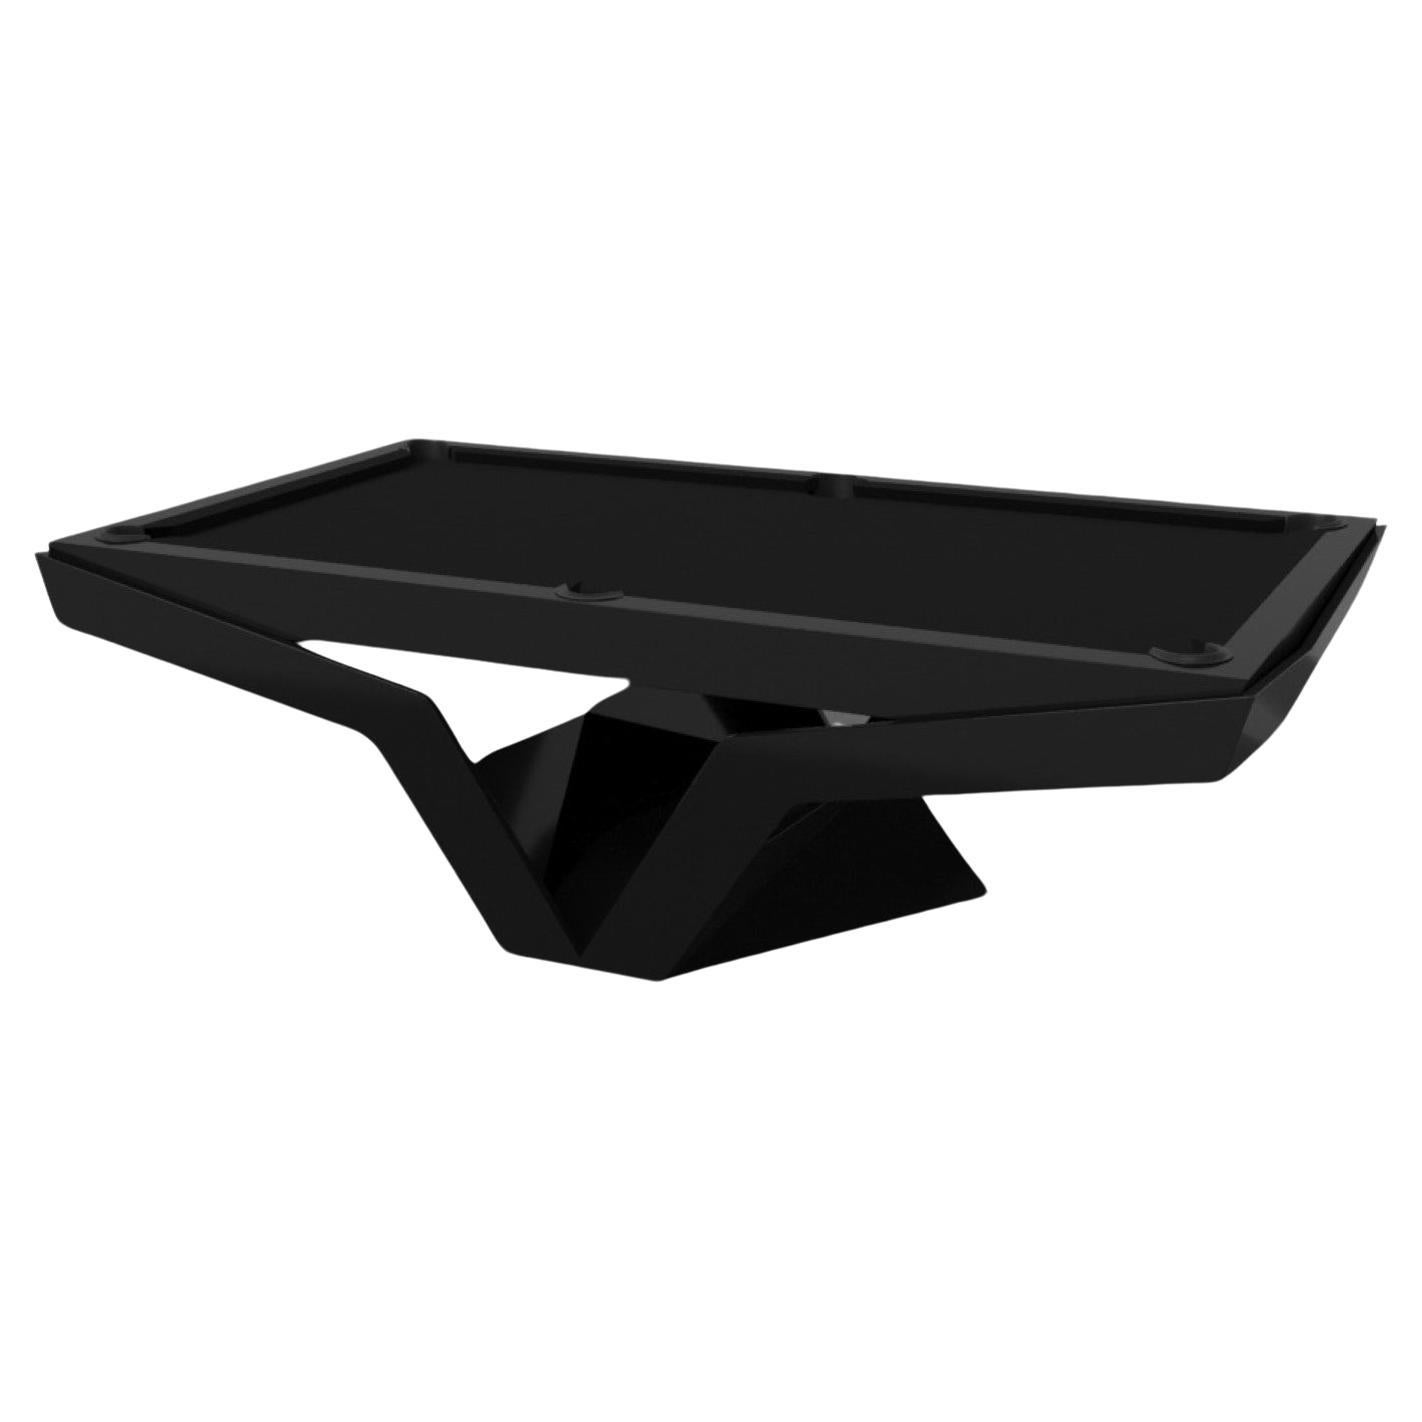 Elevate Customs Enzo Pool Table /Solid Pantone Black Color in 7'/8' -Made in USA